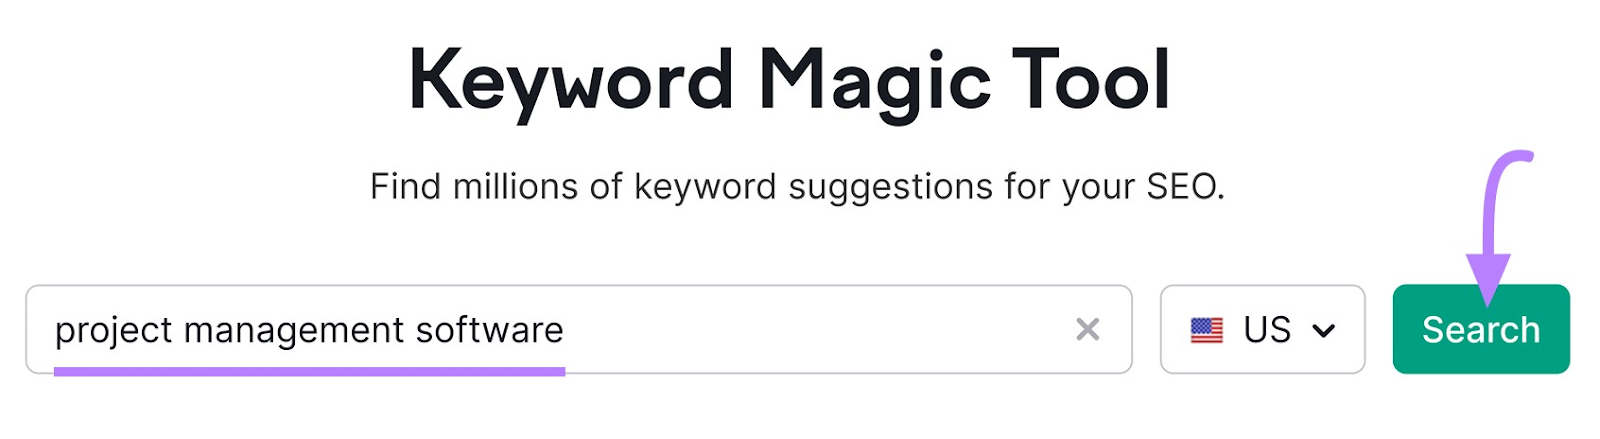 search for “project management software” in Keyword Magic Tool